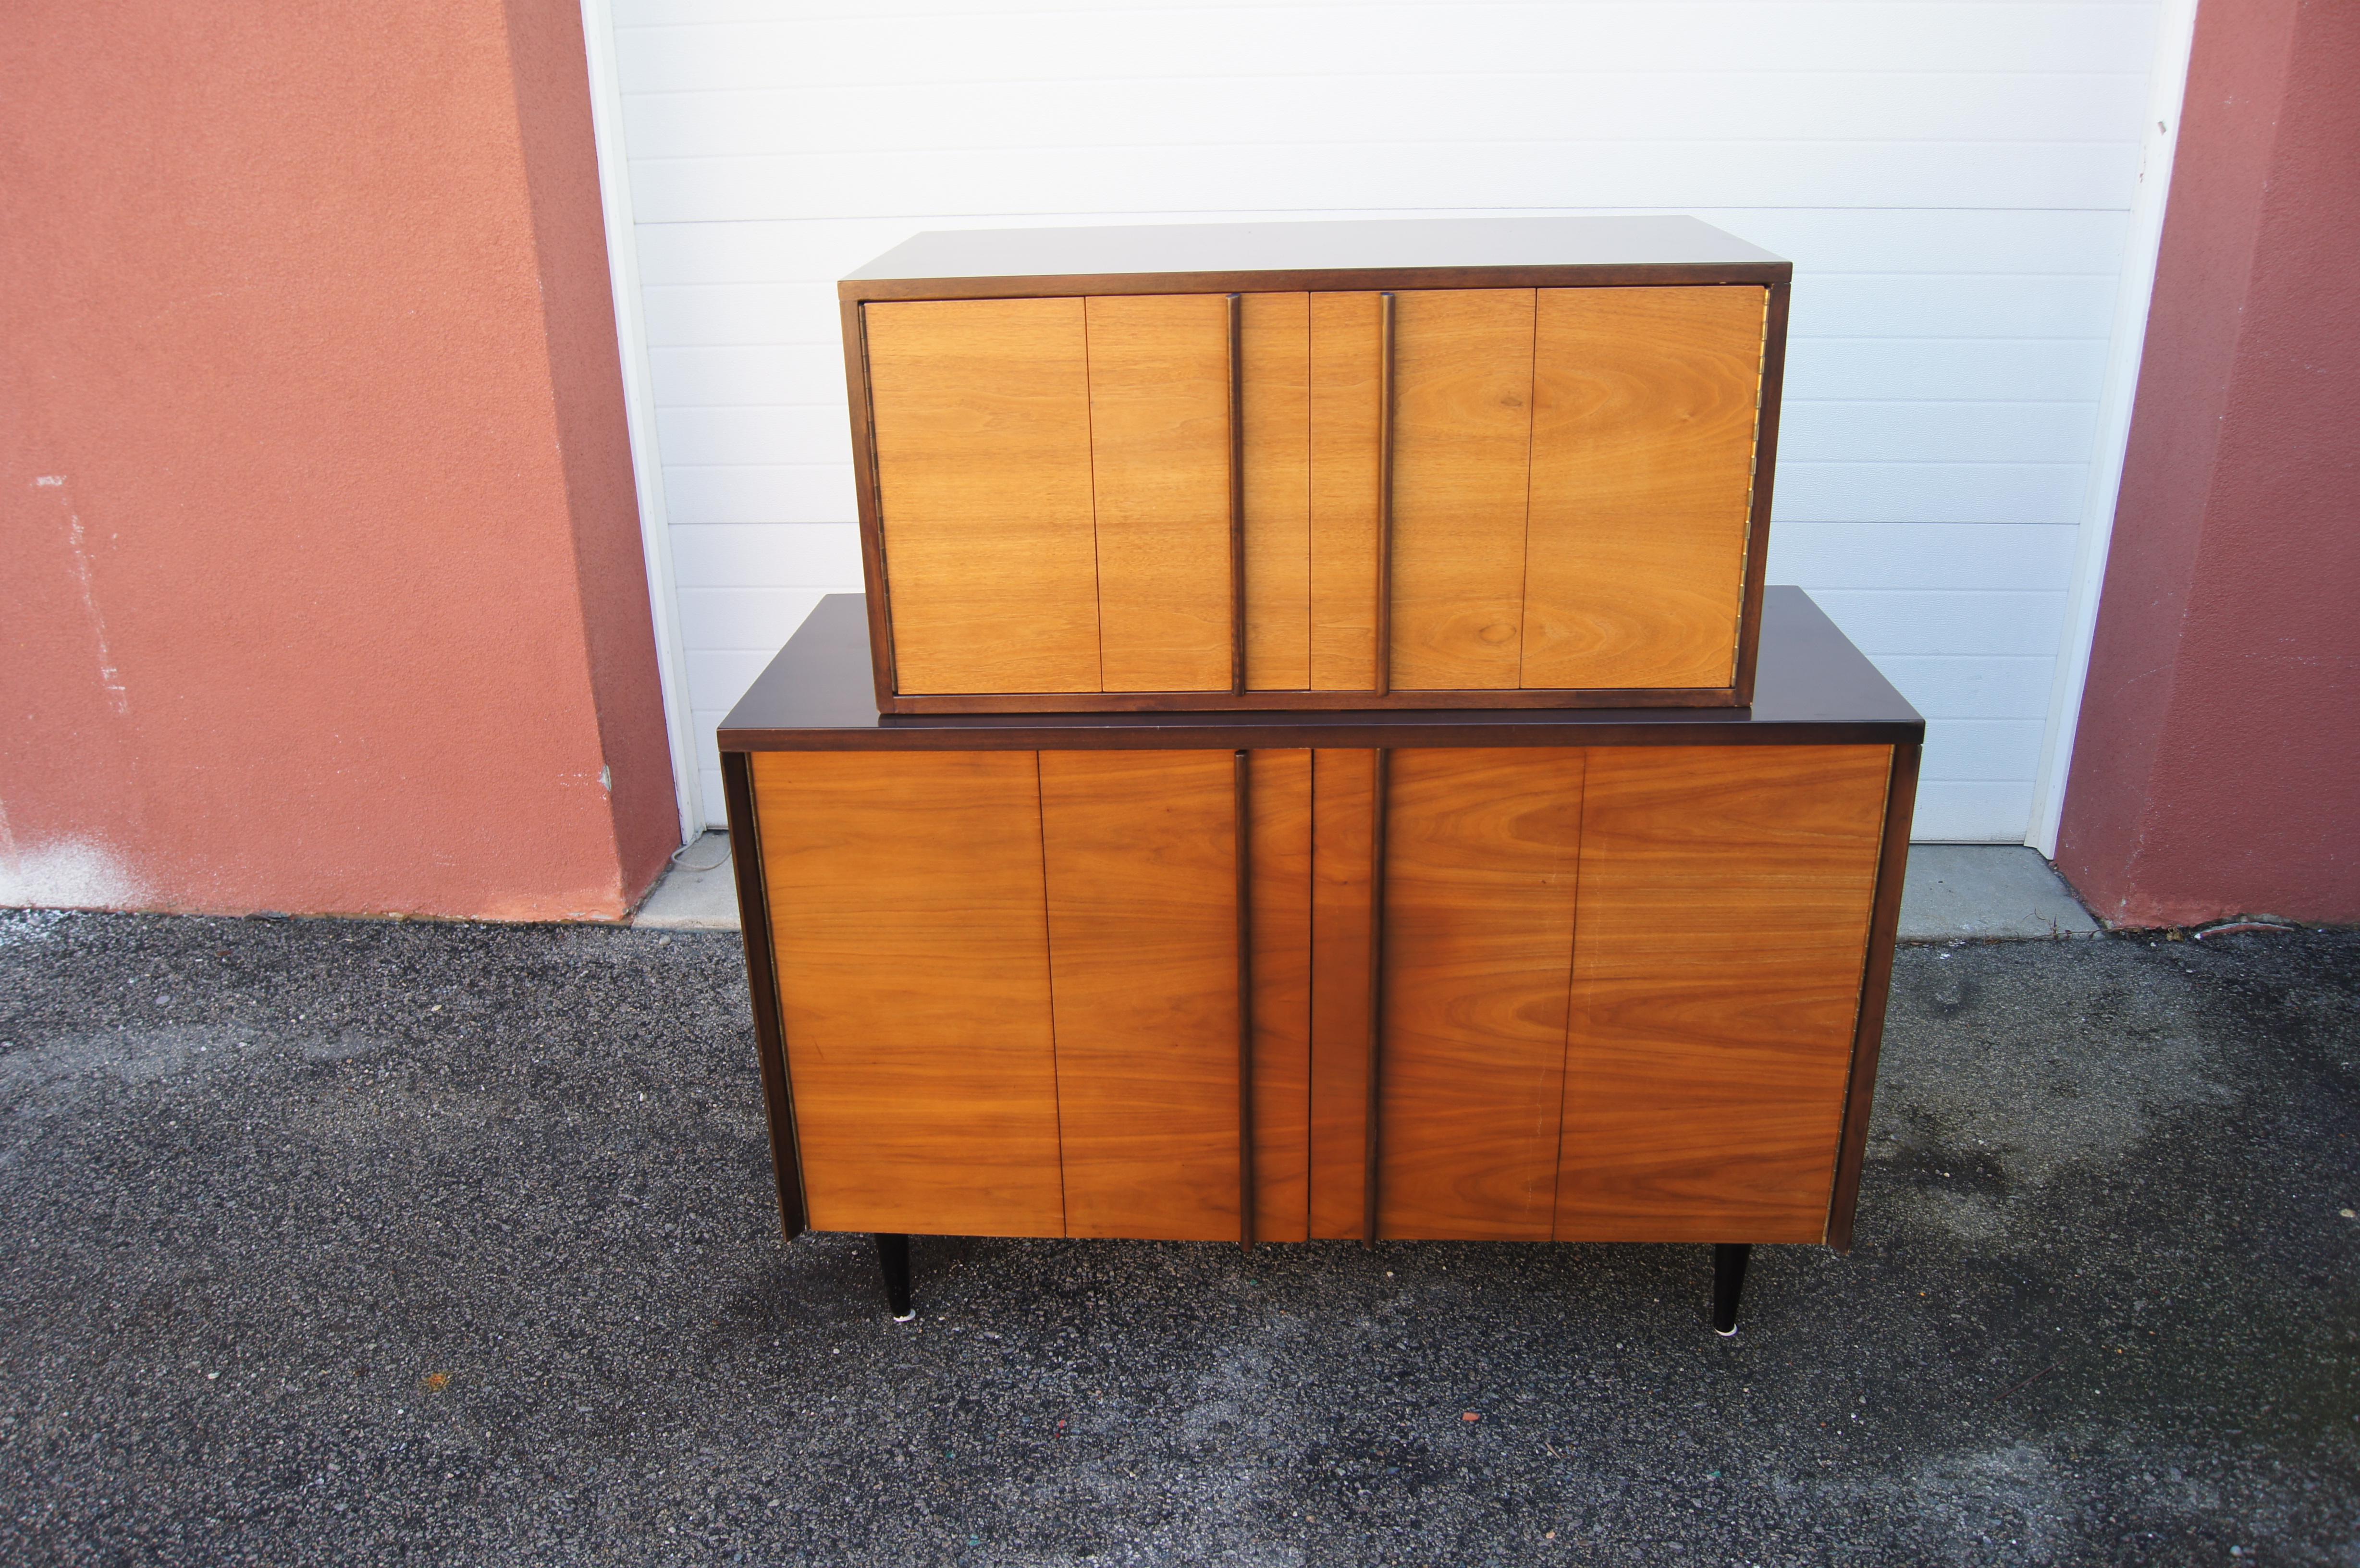 Designed by John Stuart, this mid-century highboy dresser comprises two walnut cases whose dark frames and vertical door pulls contrast with the warm-toned fronts. The top case contains three wide drawers, one of which is divided in half and one of